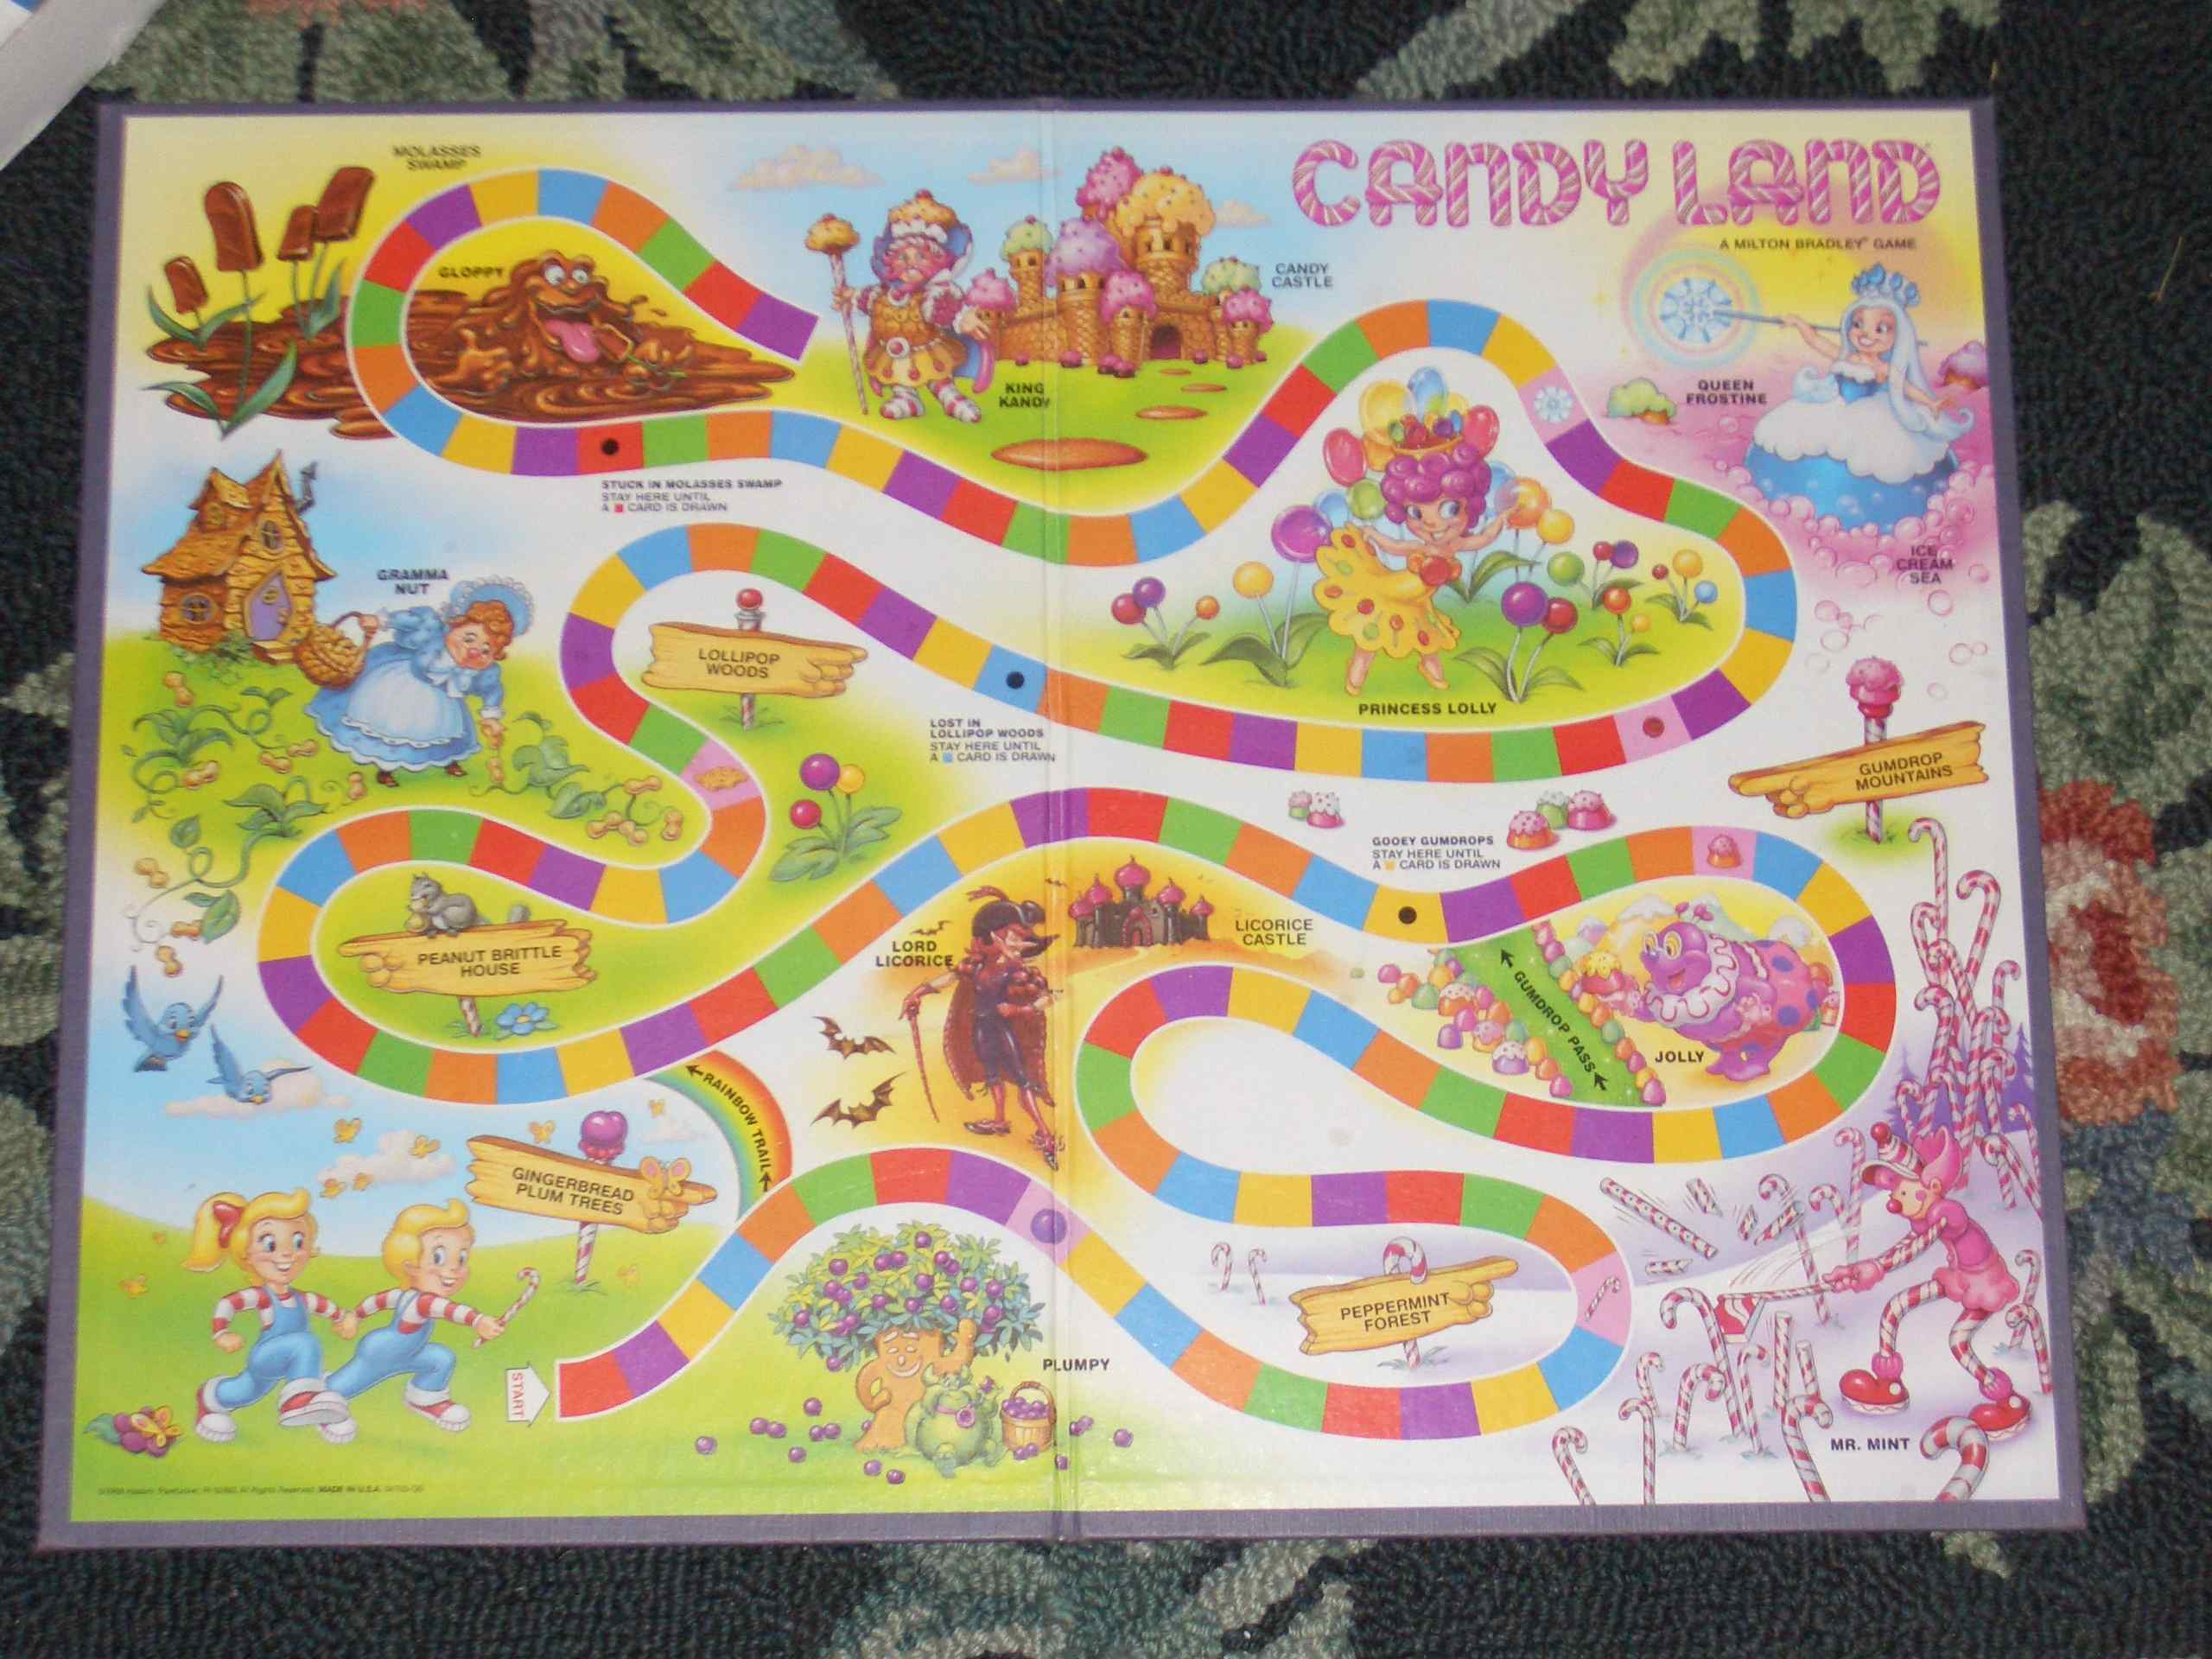 Mathematical Analysis Of Candyland Classic Version